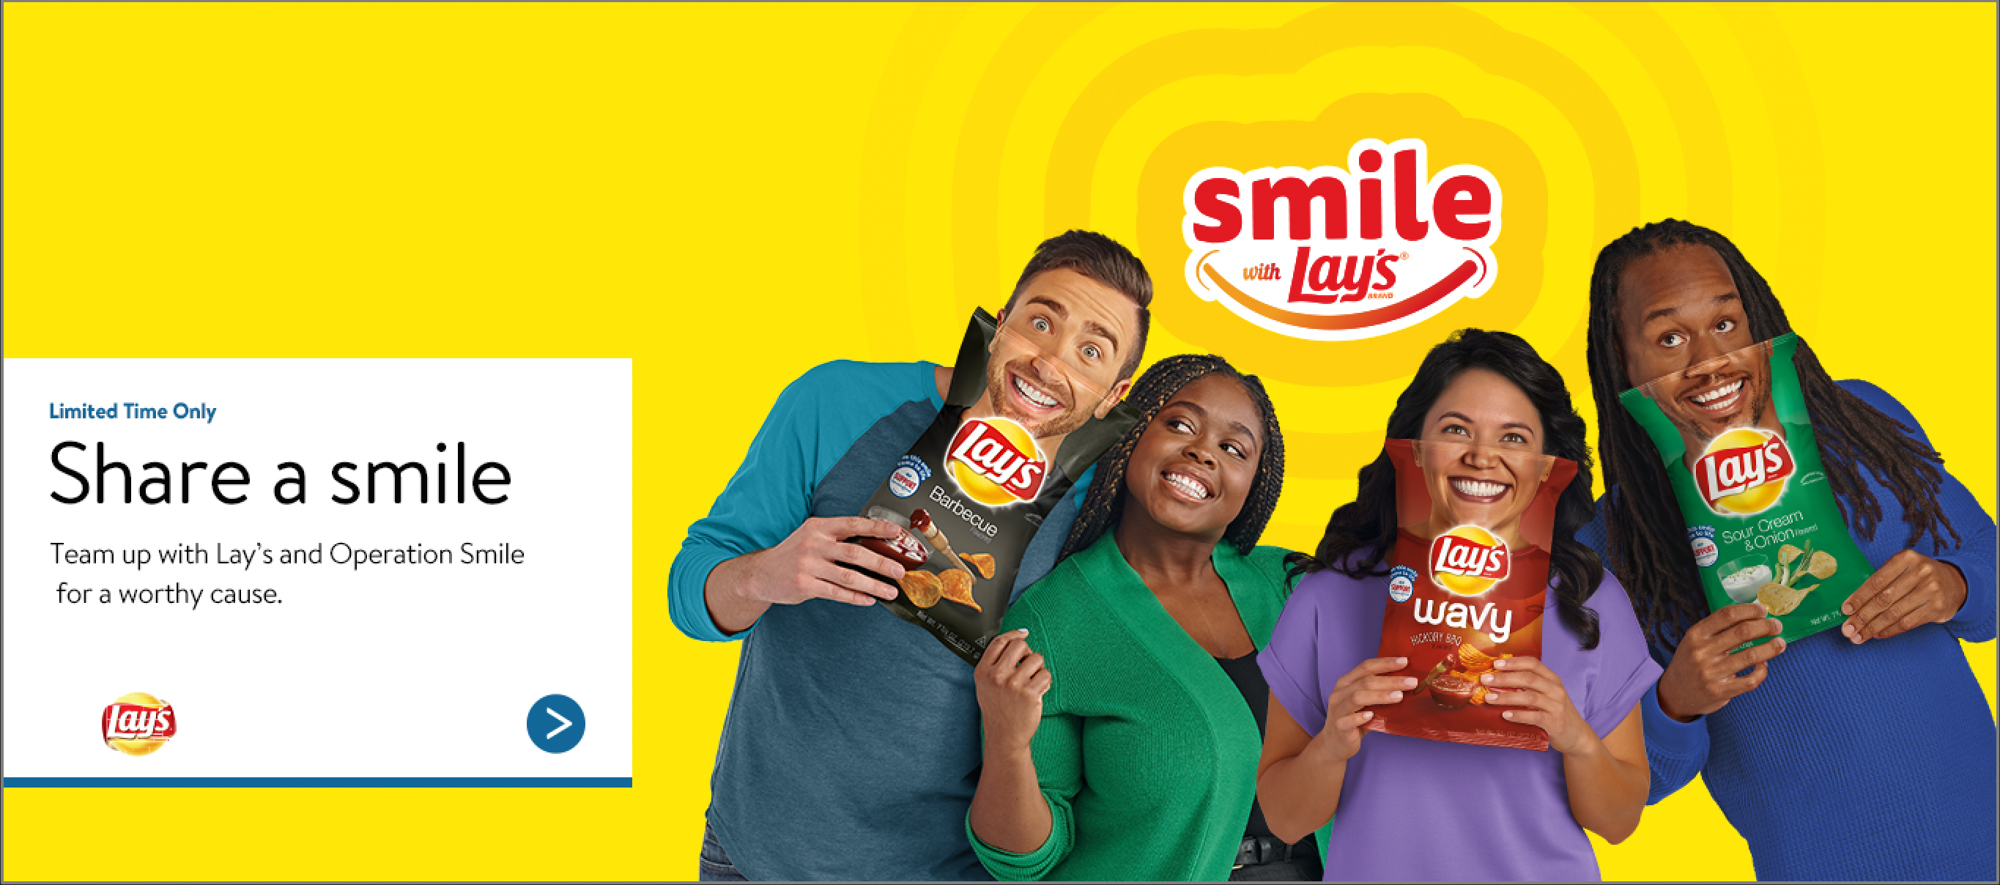 Lay’s Unveils 60+ New Potato Chip Bags Starring 31 ‘Everyday Smilers’